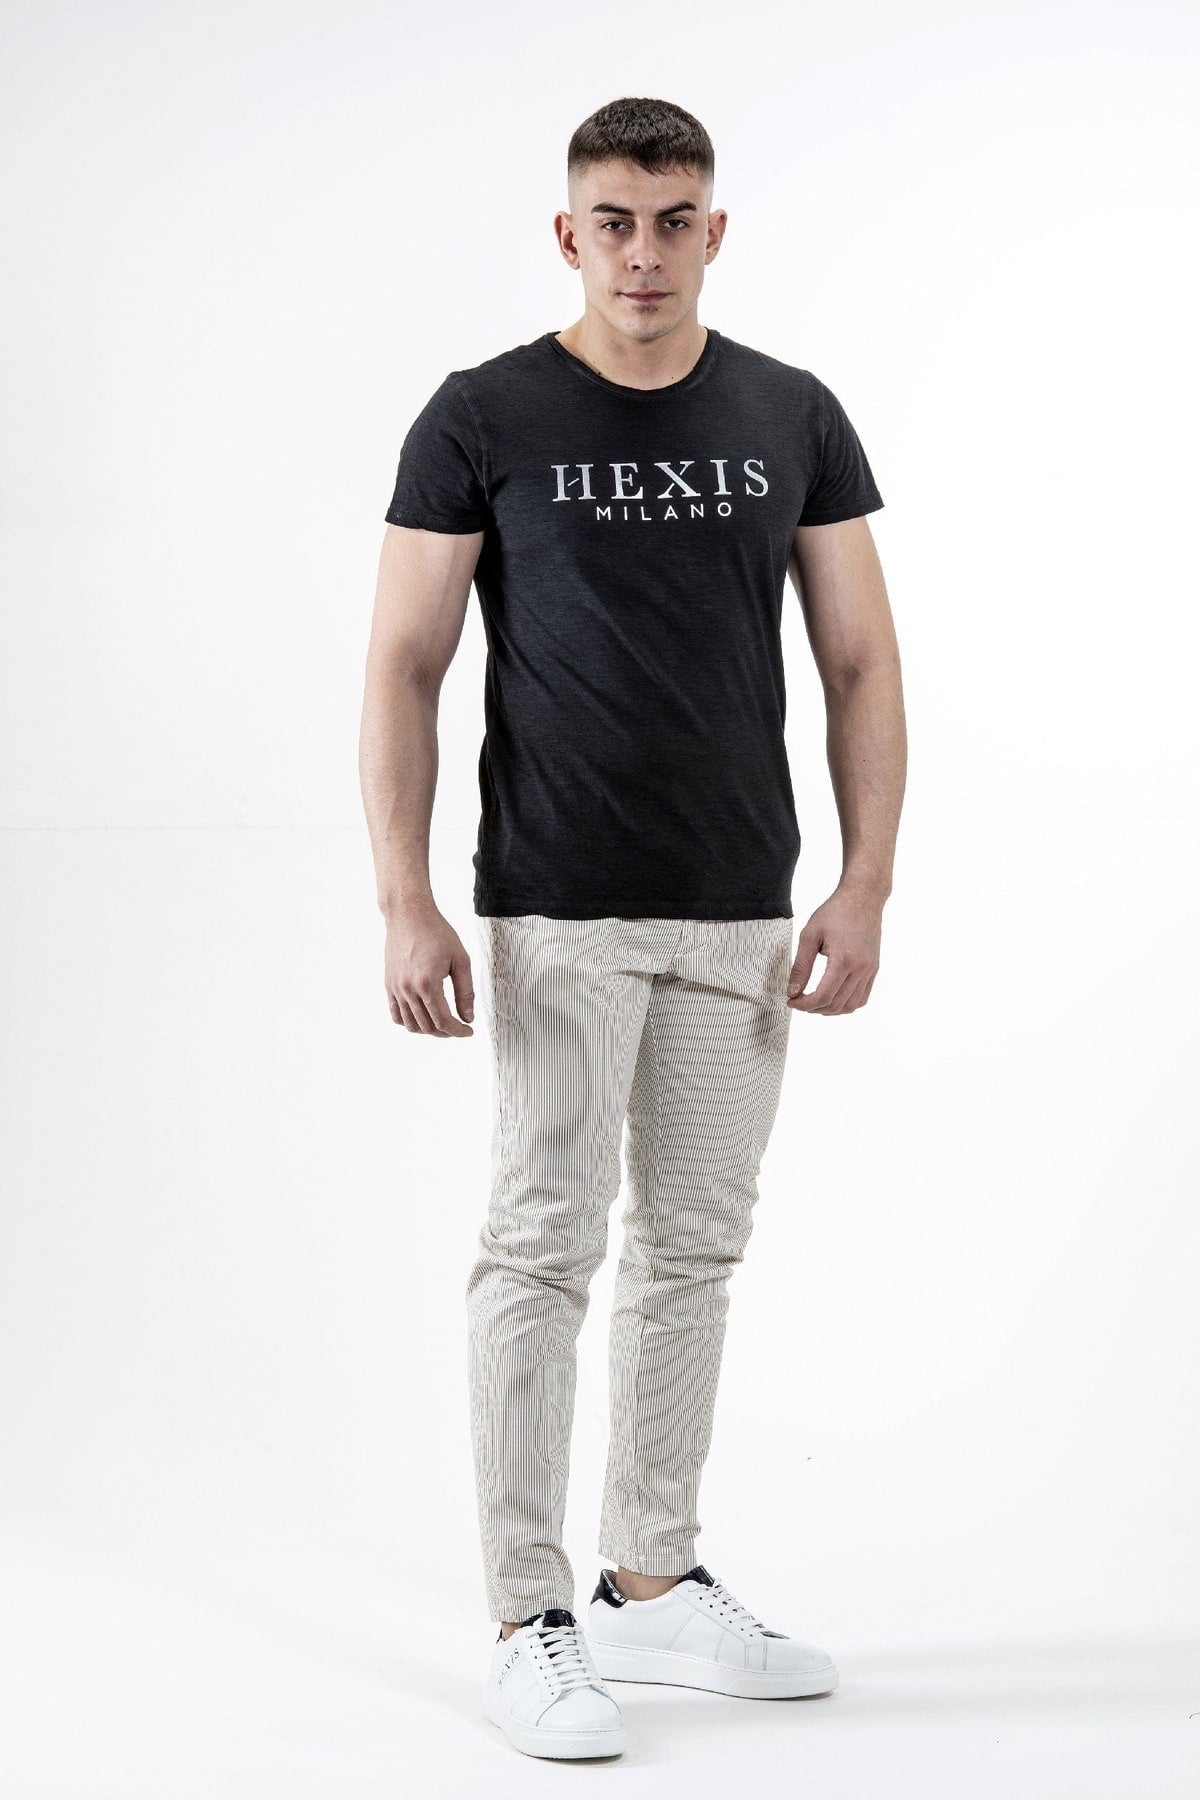 T-Shirt HEXIS colore nera